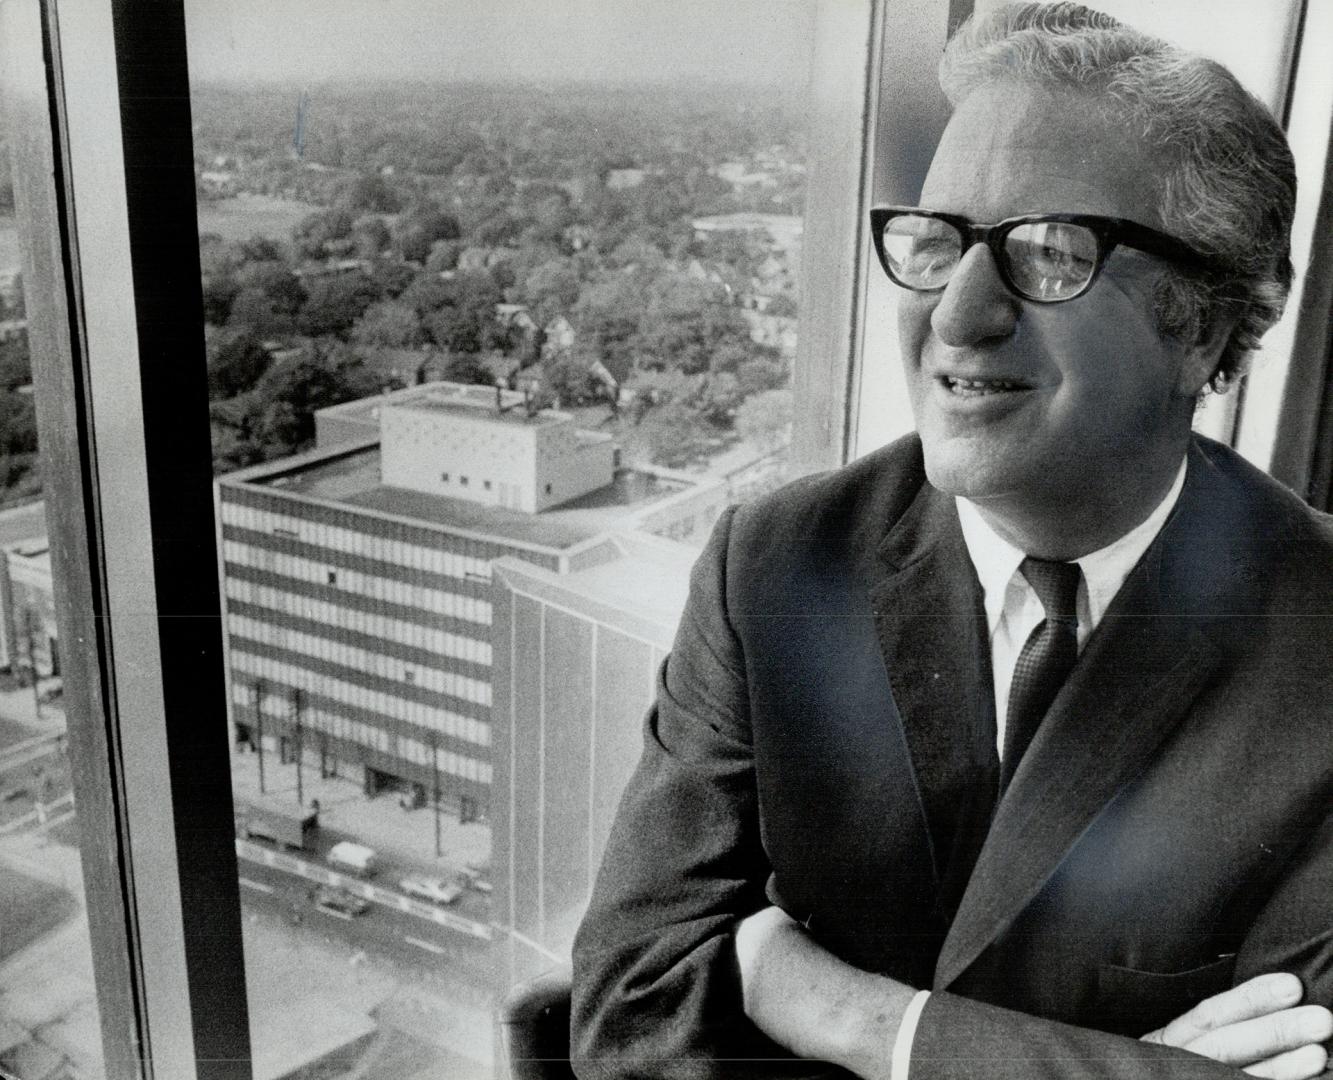 Back to school goes Irving Sussman, president of a Yonge St